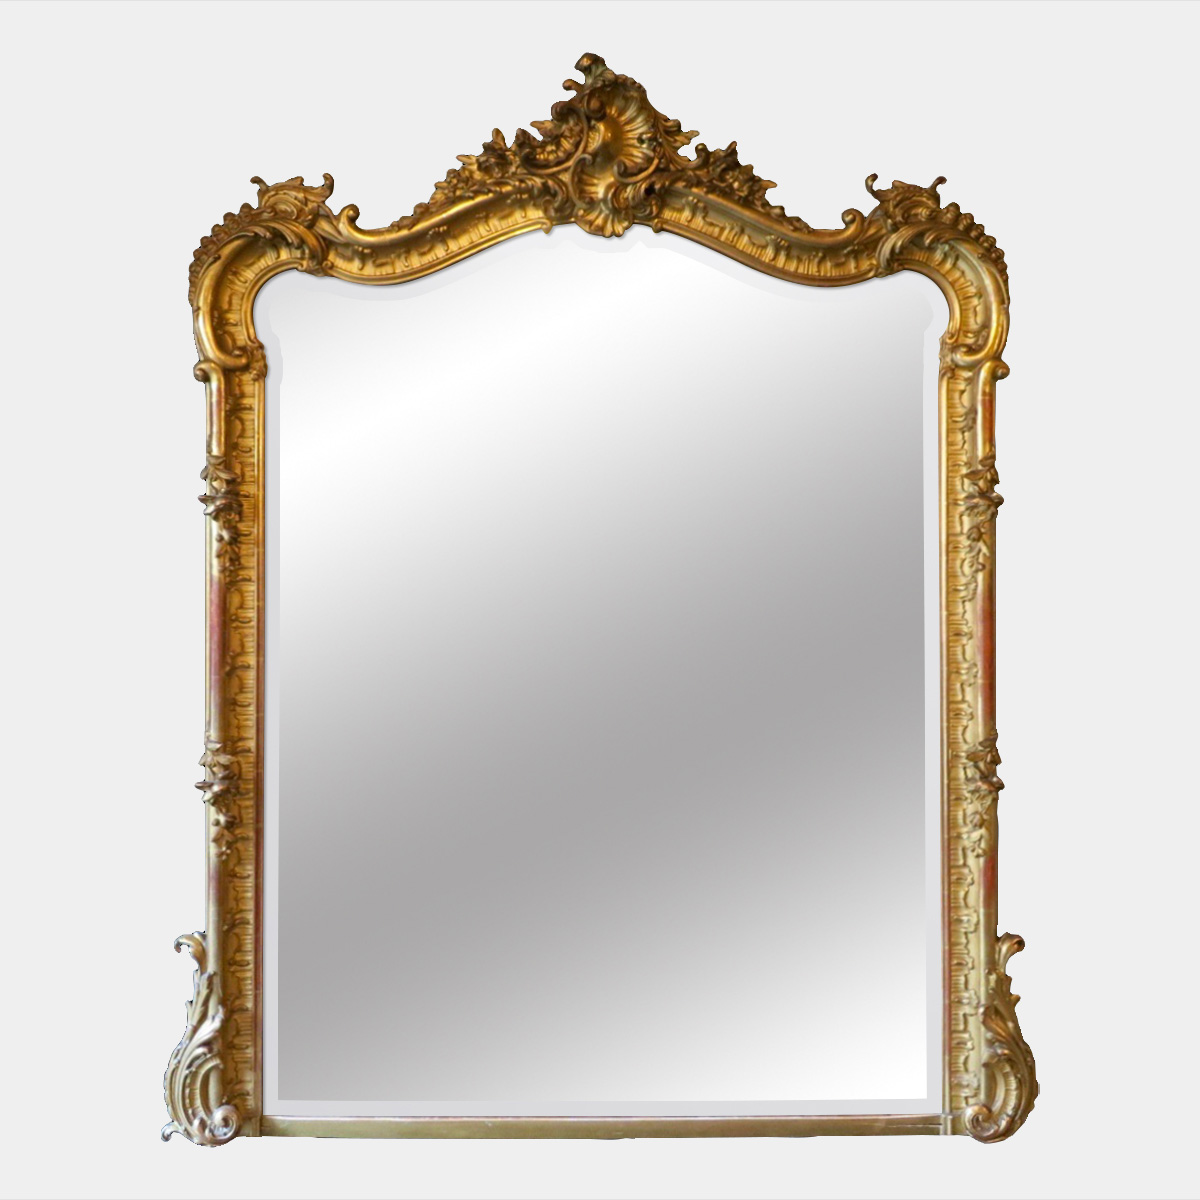 French Rococo Gold Gilt Over Mantle, Antique Brass Mantle Mirror